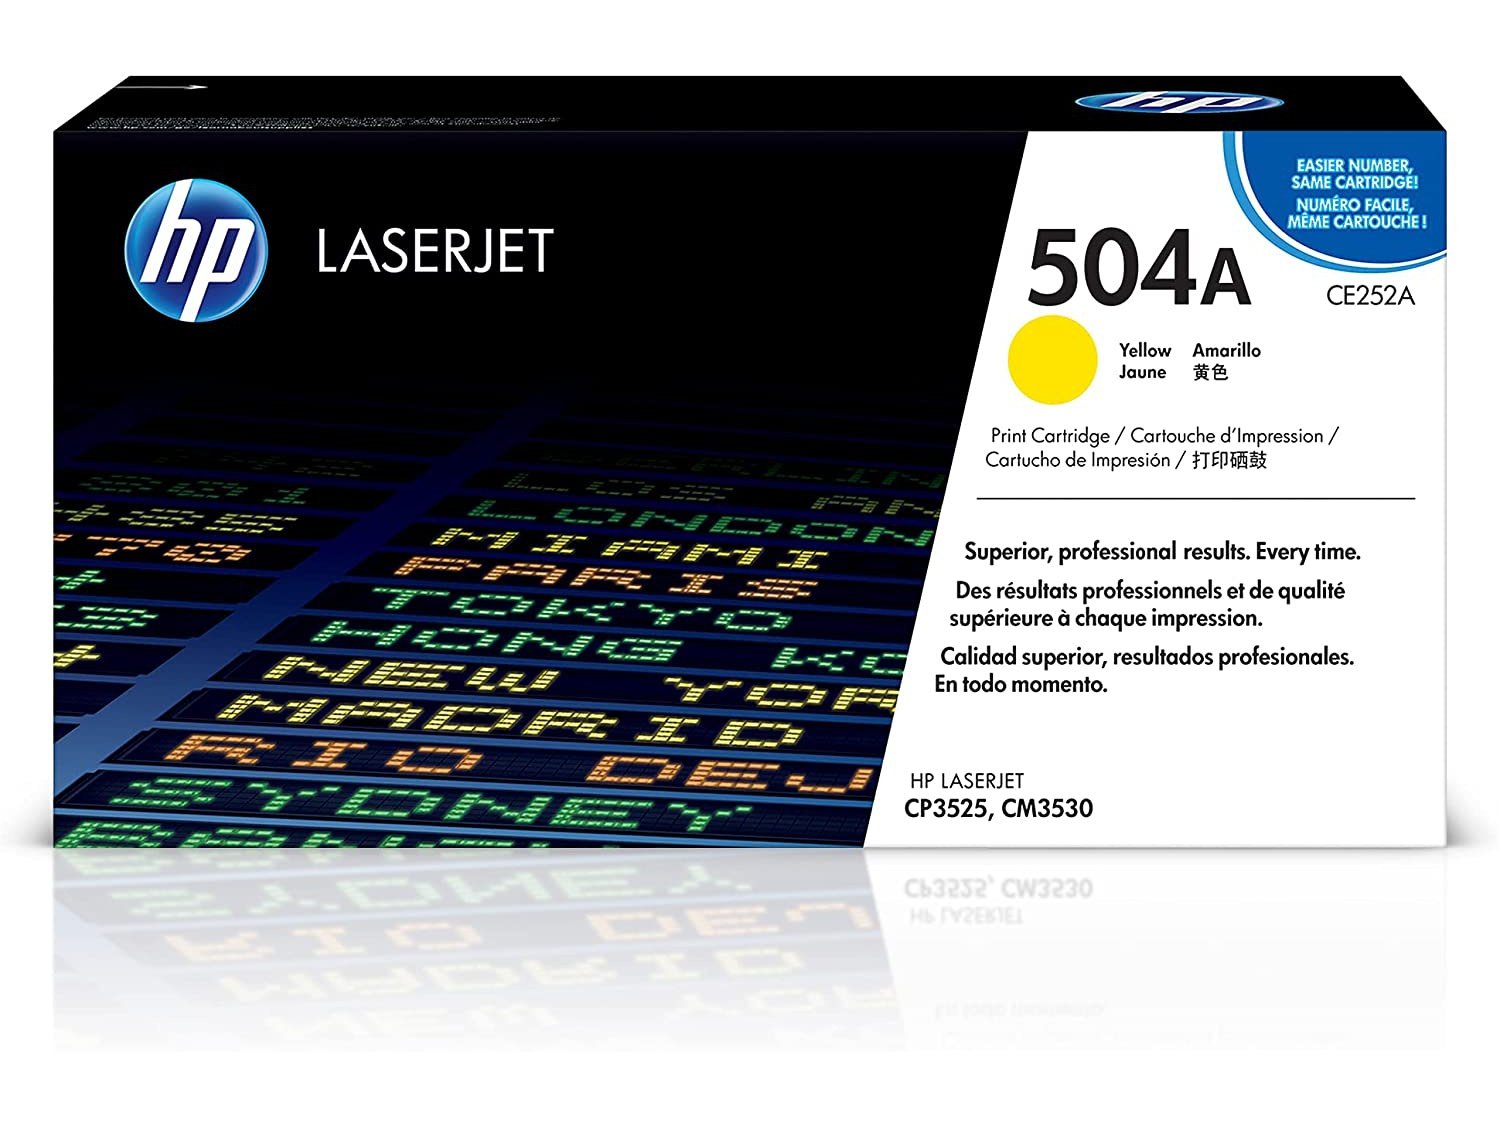 ICU Compatible/ OEM Get HP ICUCE252A Yields 7000 Pages Yellow CE252A Laser Toner Cartridge for Hewlett Packard (HP 504A) CP3520/CP3530